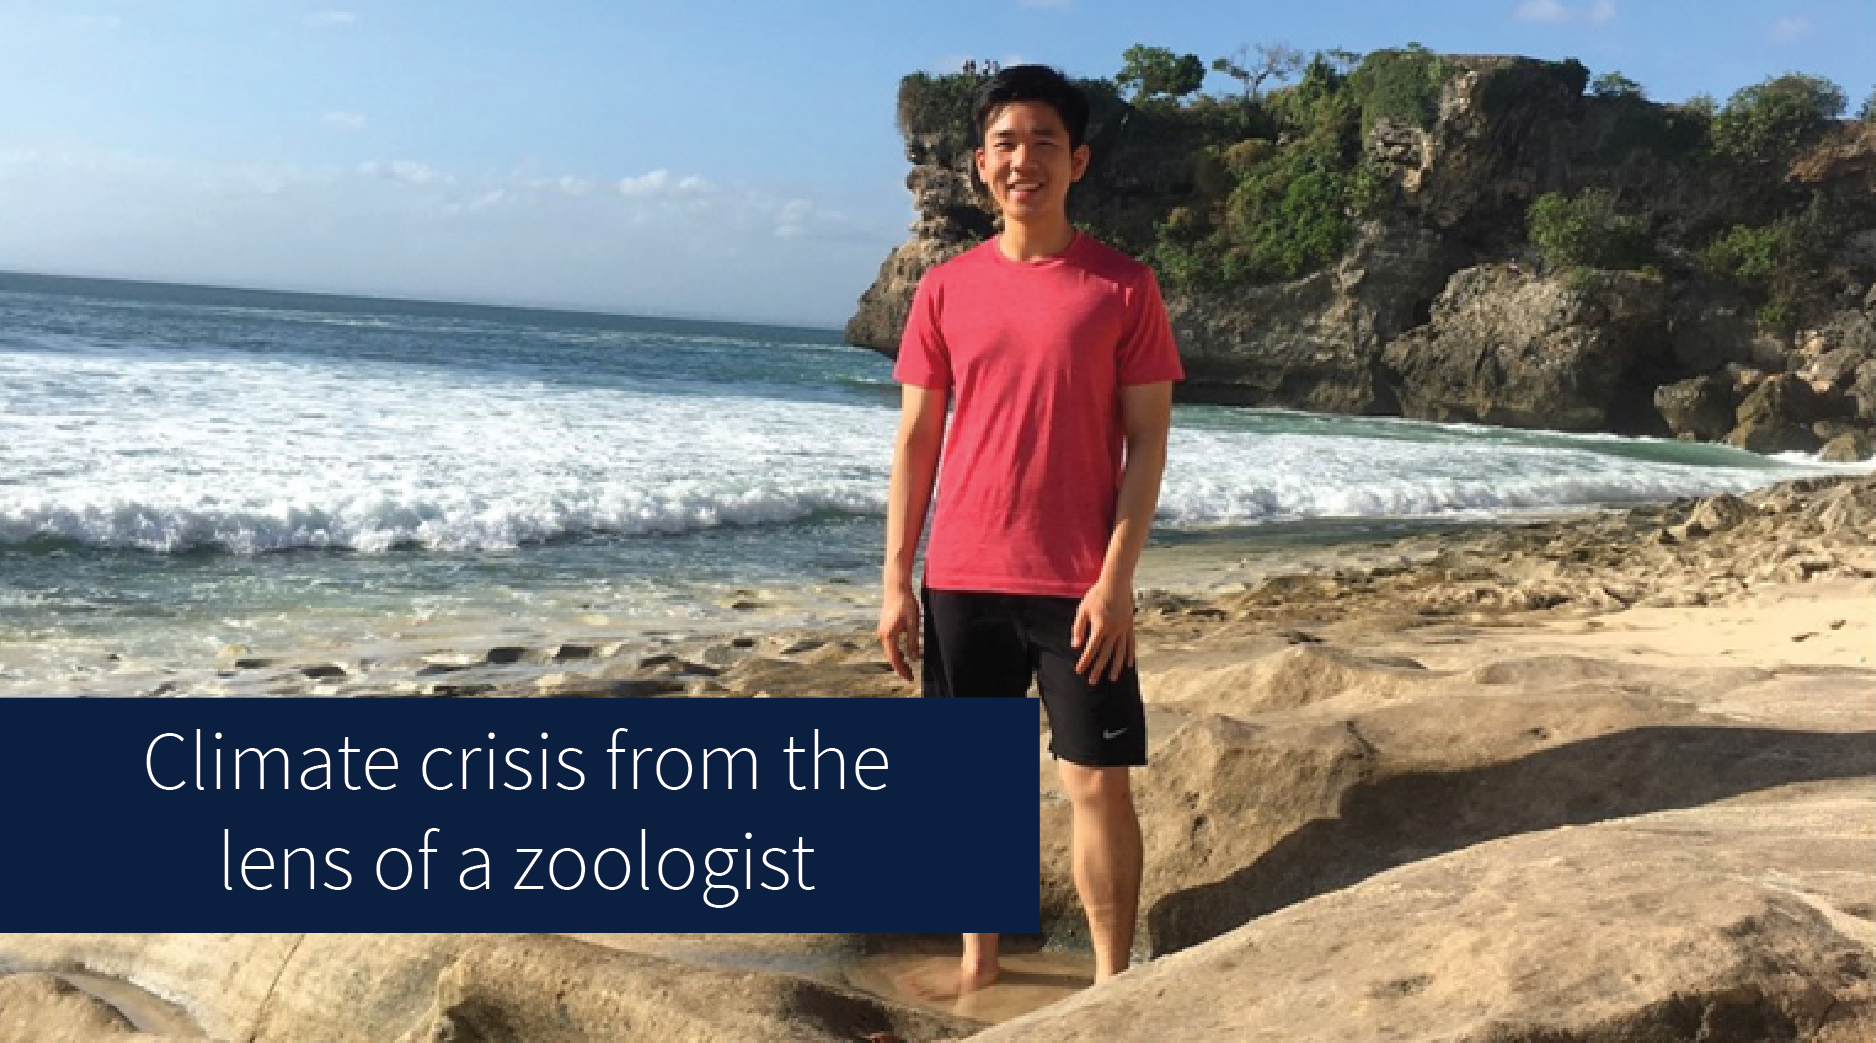 Fourth year Zoology student Nathan Oenardi stands on beach. Title reads 'Climate crisis from the lens of a zoologist'